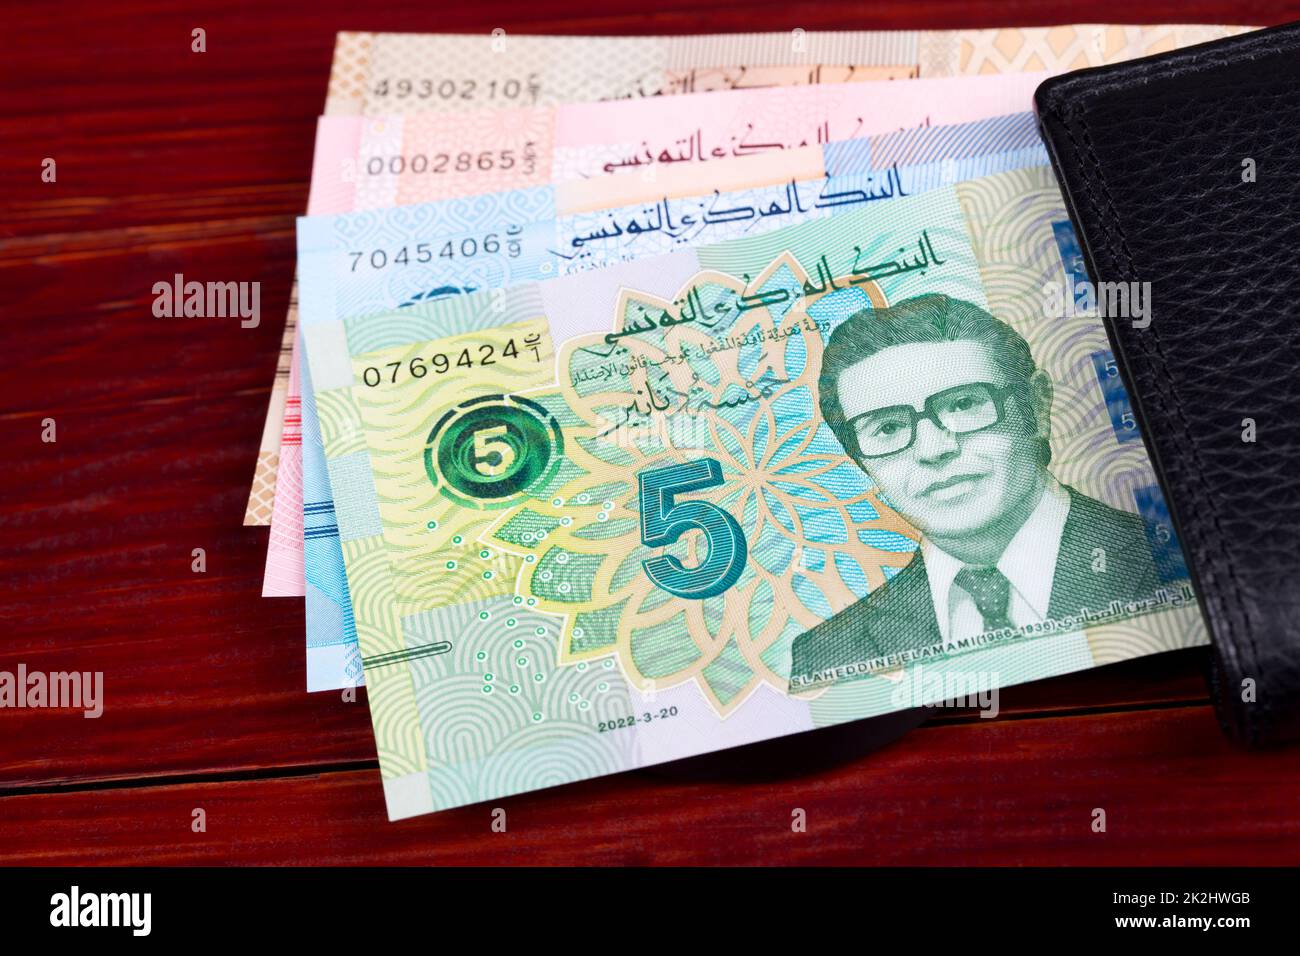 Tunisian money - Dinars - new series of banknotes in the wallet Stock Photo